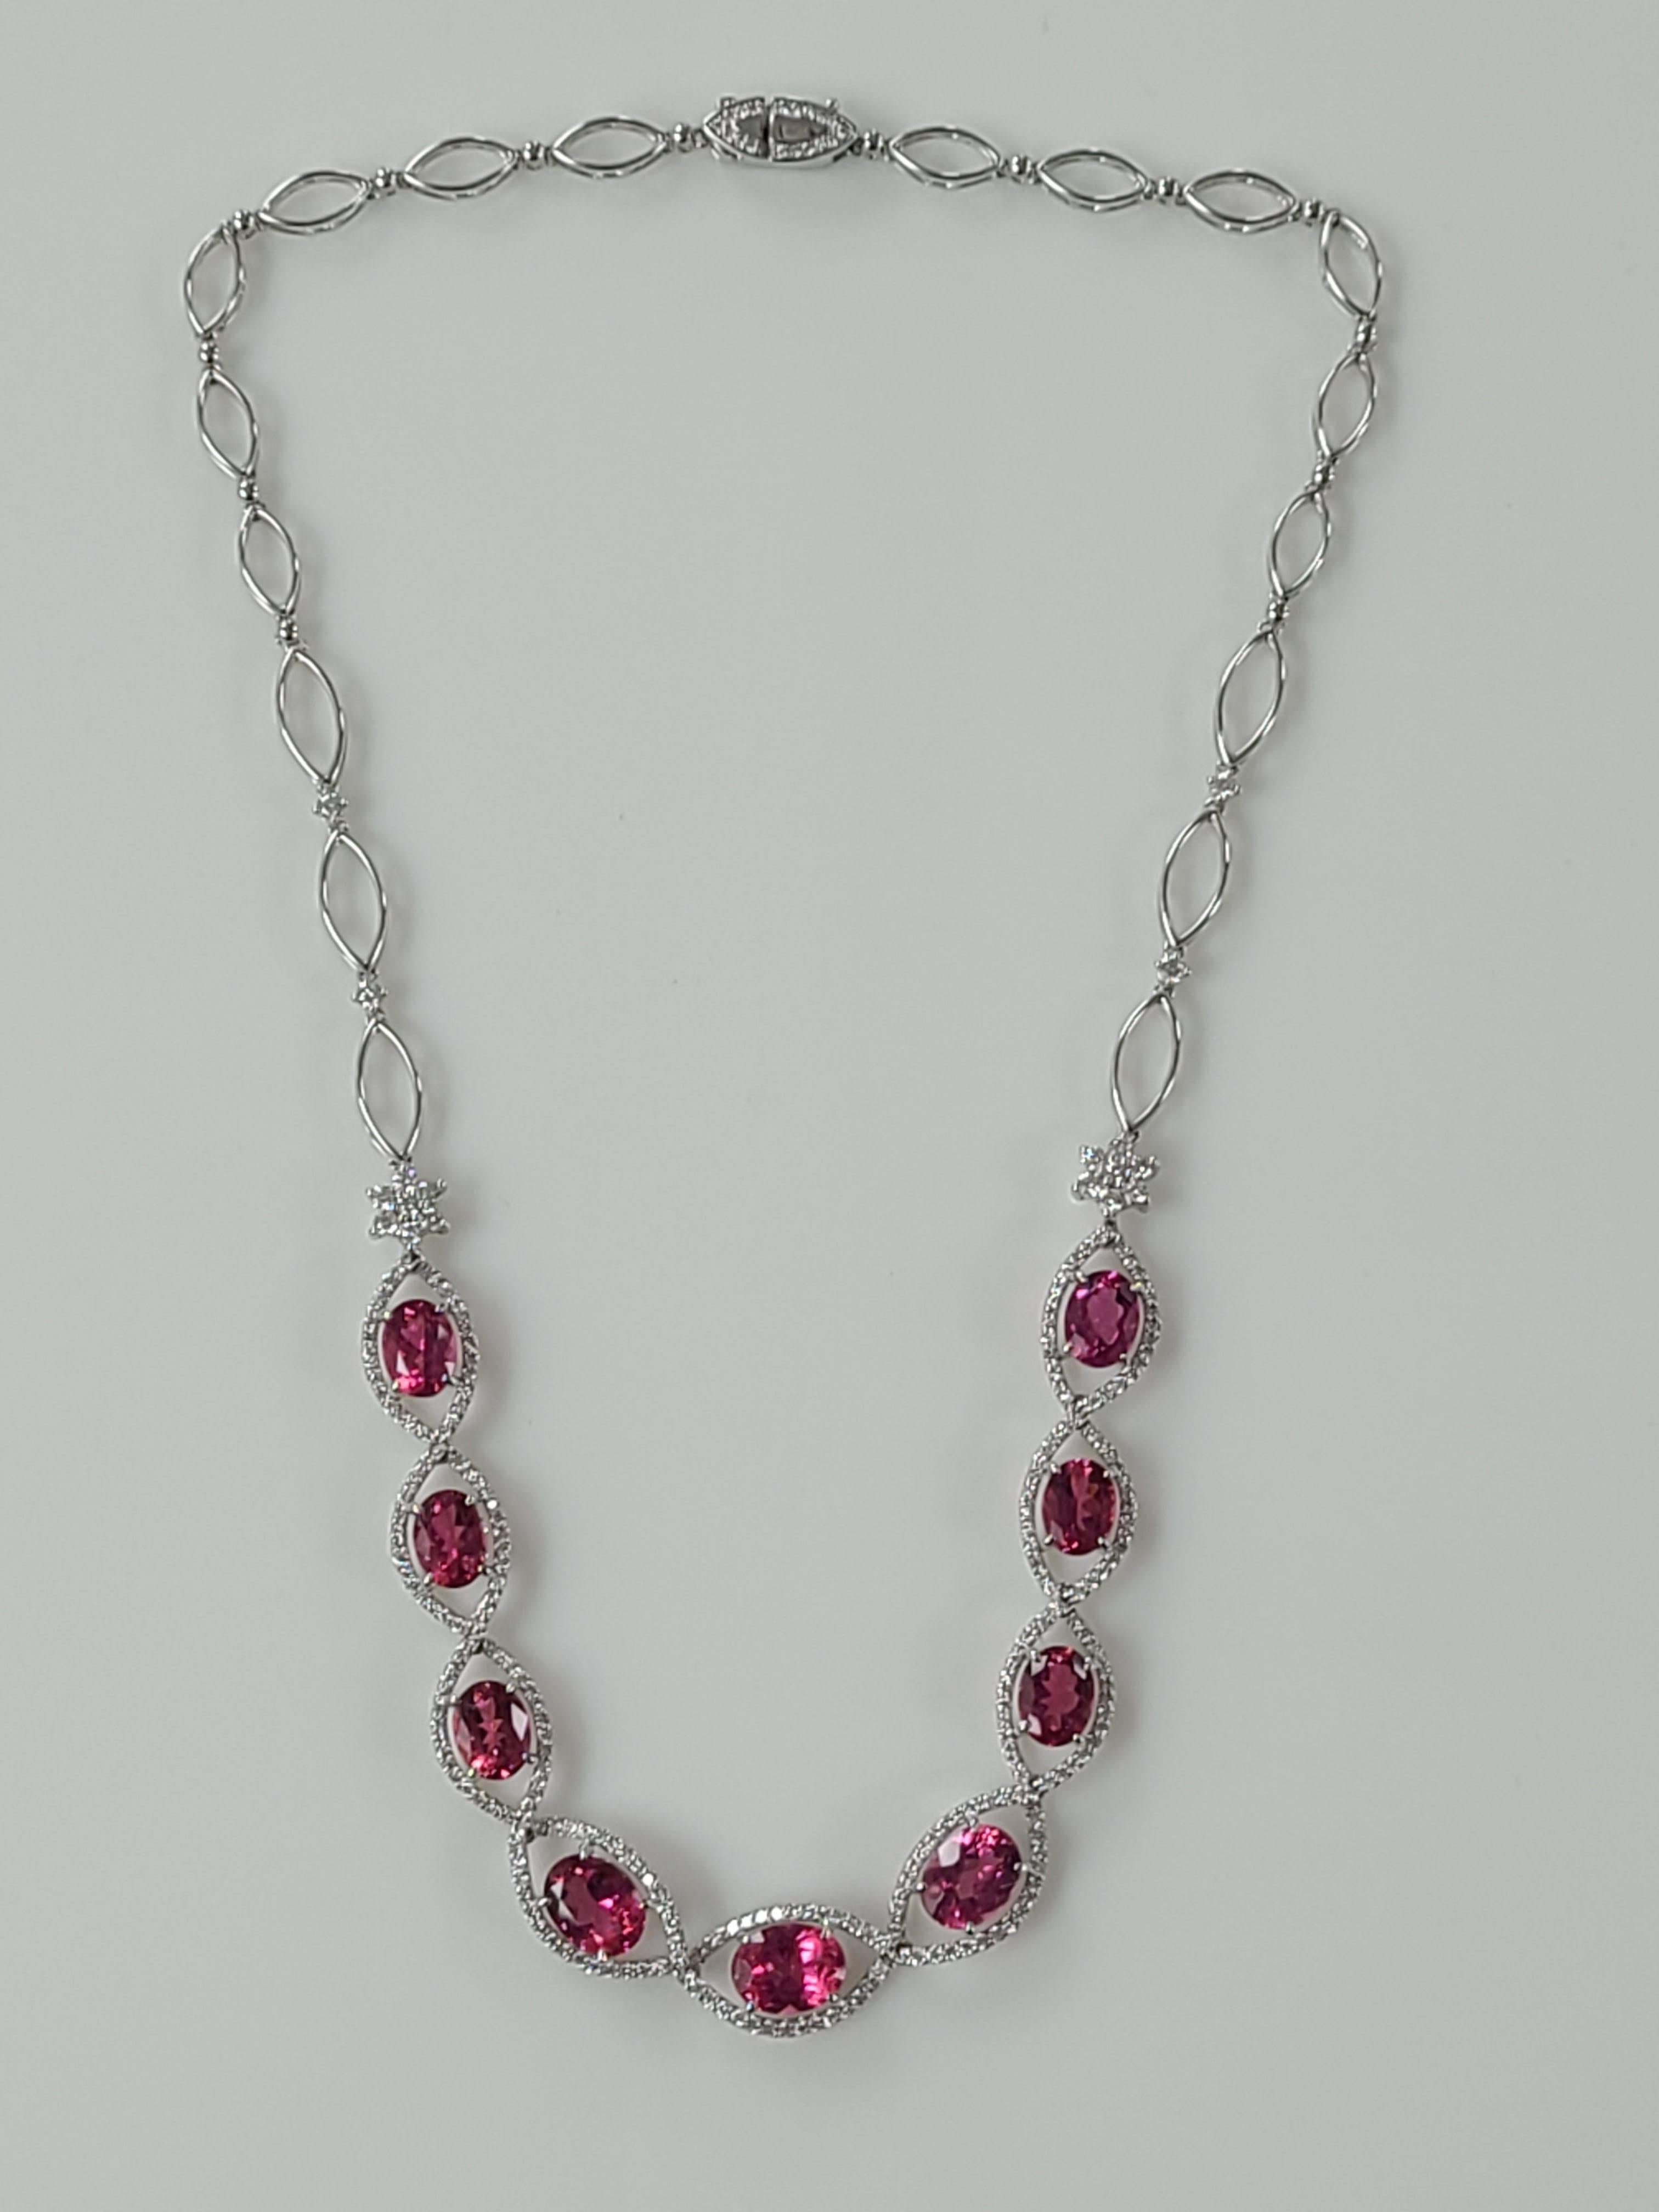 A Gorgeous Tourmaline necklace set in 18K White Gold with diamonds . The tourmalines are beautiful Pink colour with Superior cutting and weight about 12.19 carats and diamond weight is 2.4 carats. The necklace dimensions in cm 20 x 1 x .5 (LXWXD).